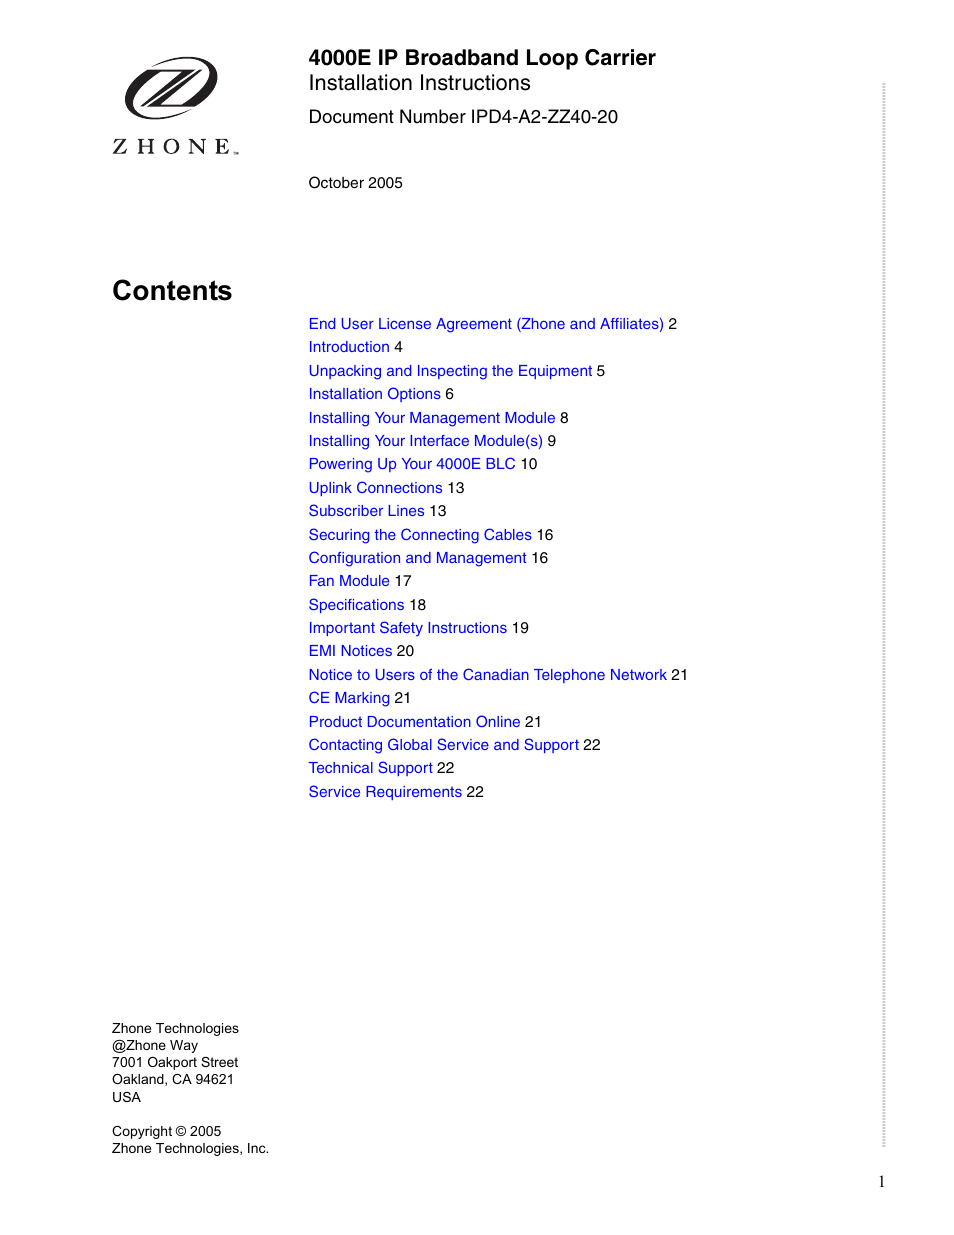 Zhone Technologies 4000E User Manual | 22 pages